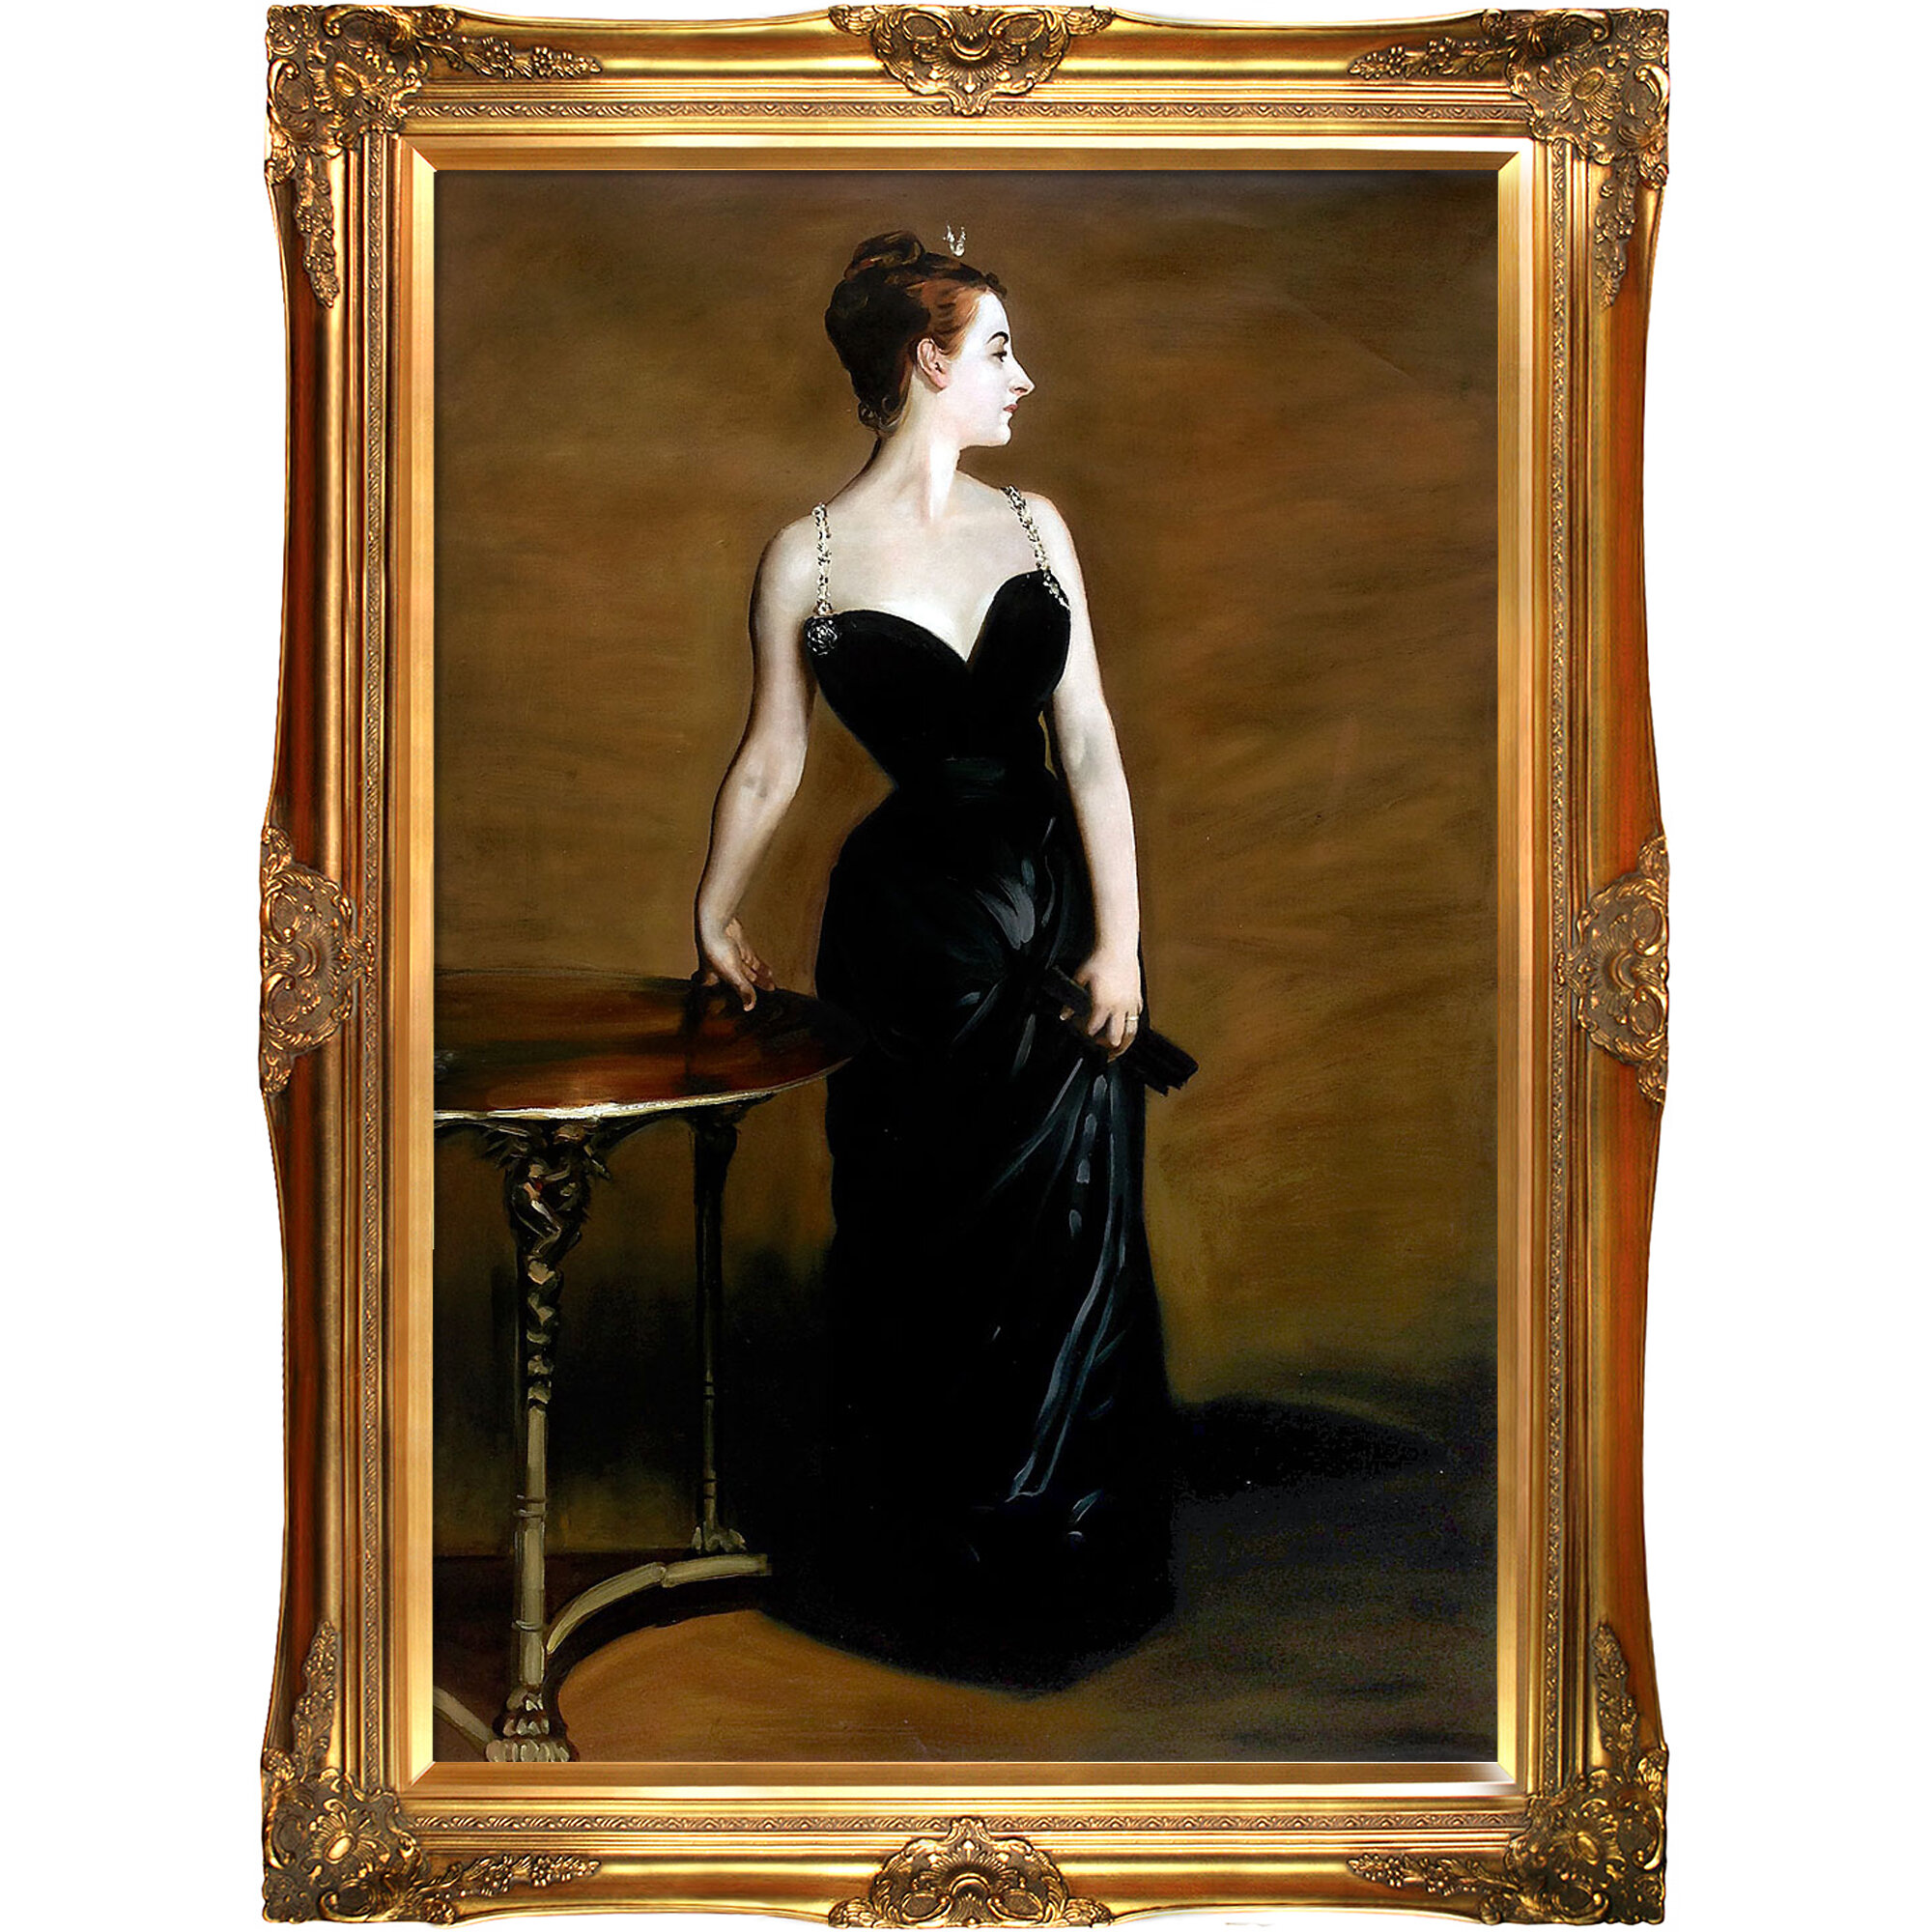 John Singer Sargent Printed Canvas Picture Home Decor Wall Art Madame X